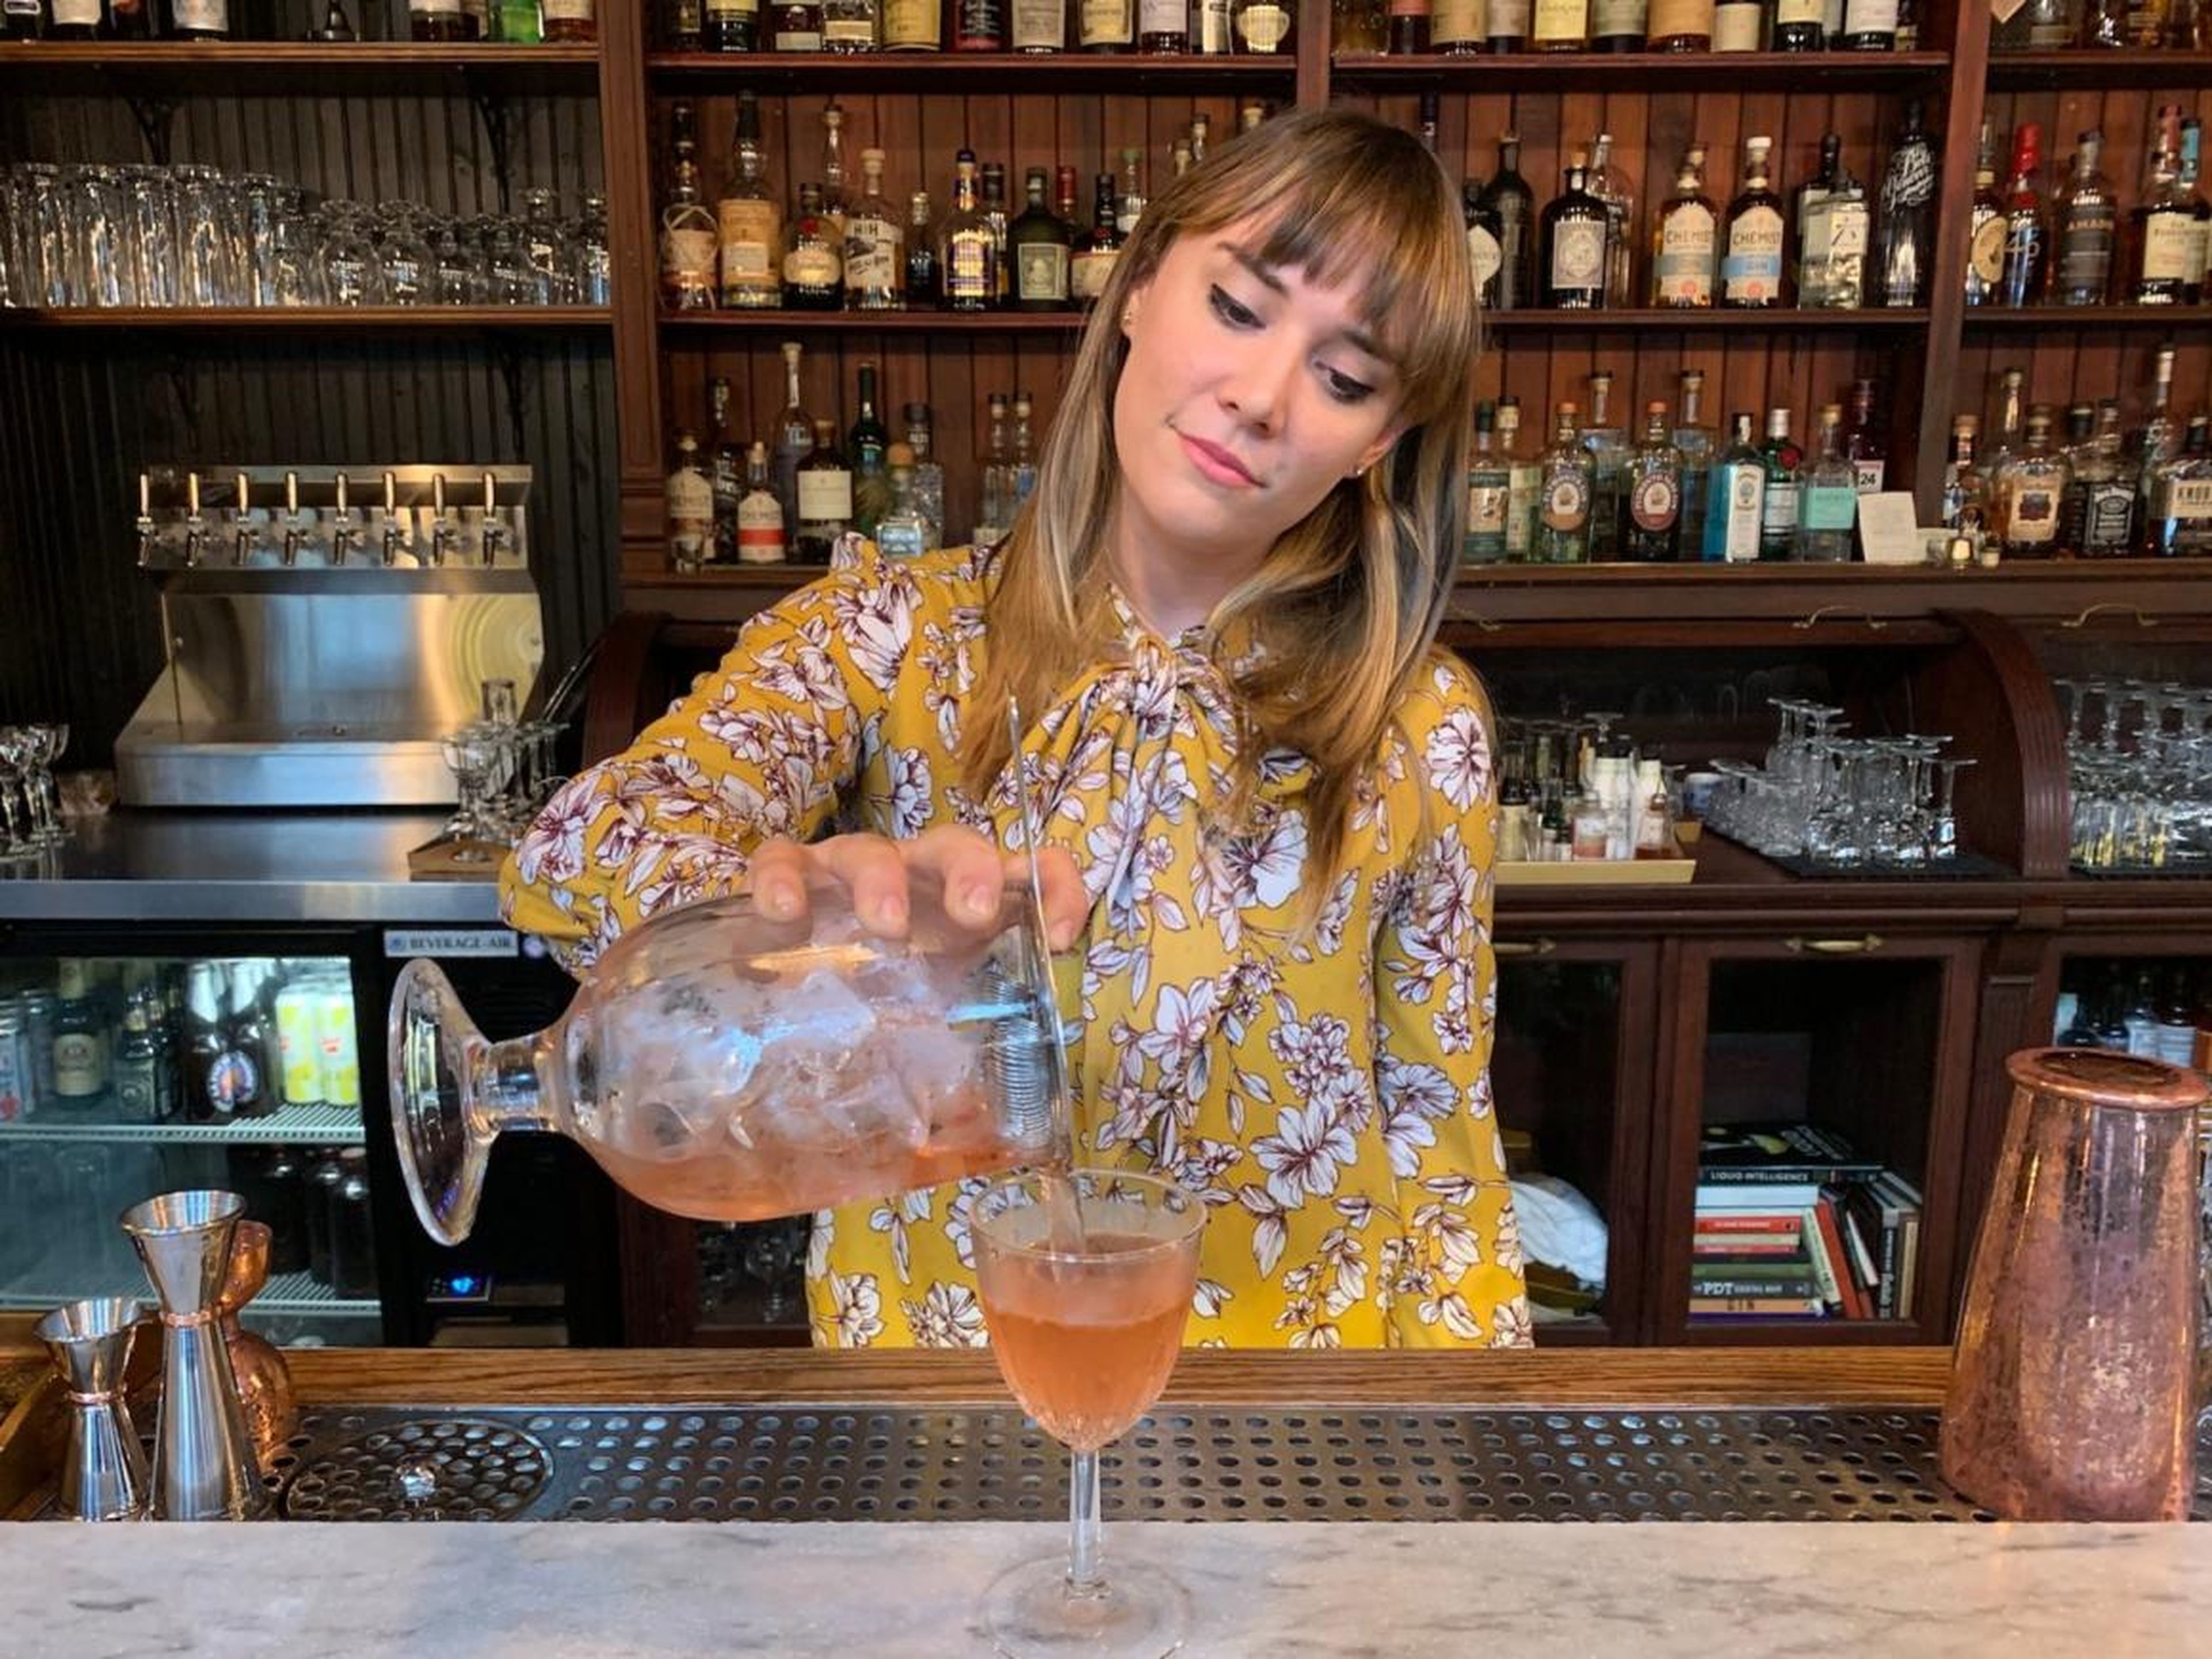 Experienced bartenders like author Emma Witman are well versed in the art of upselling.